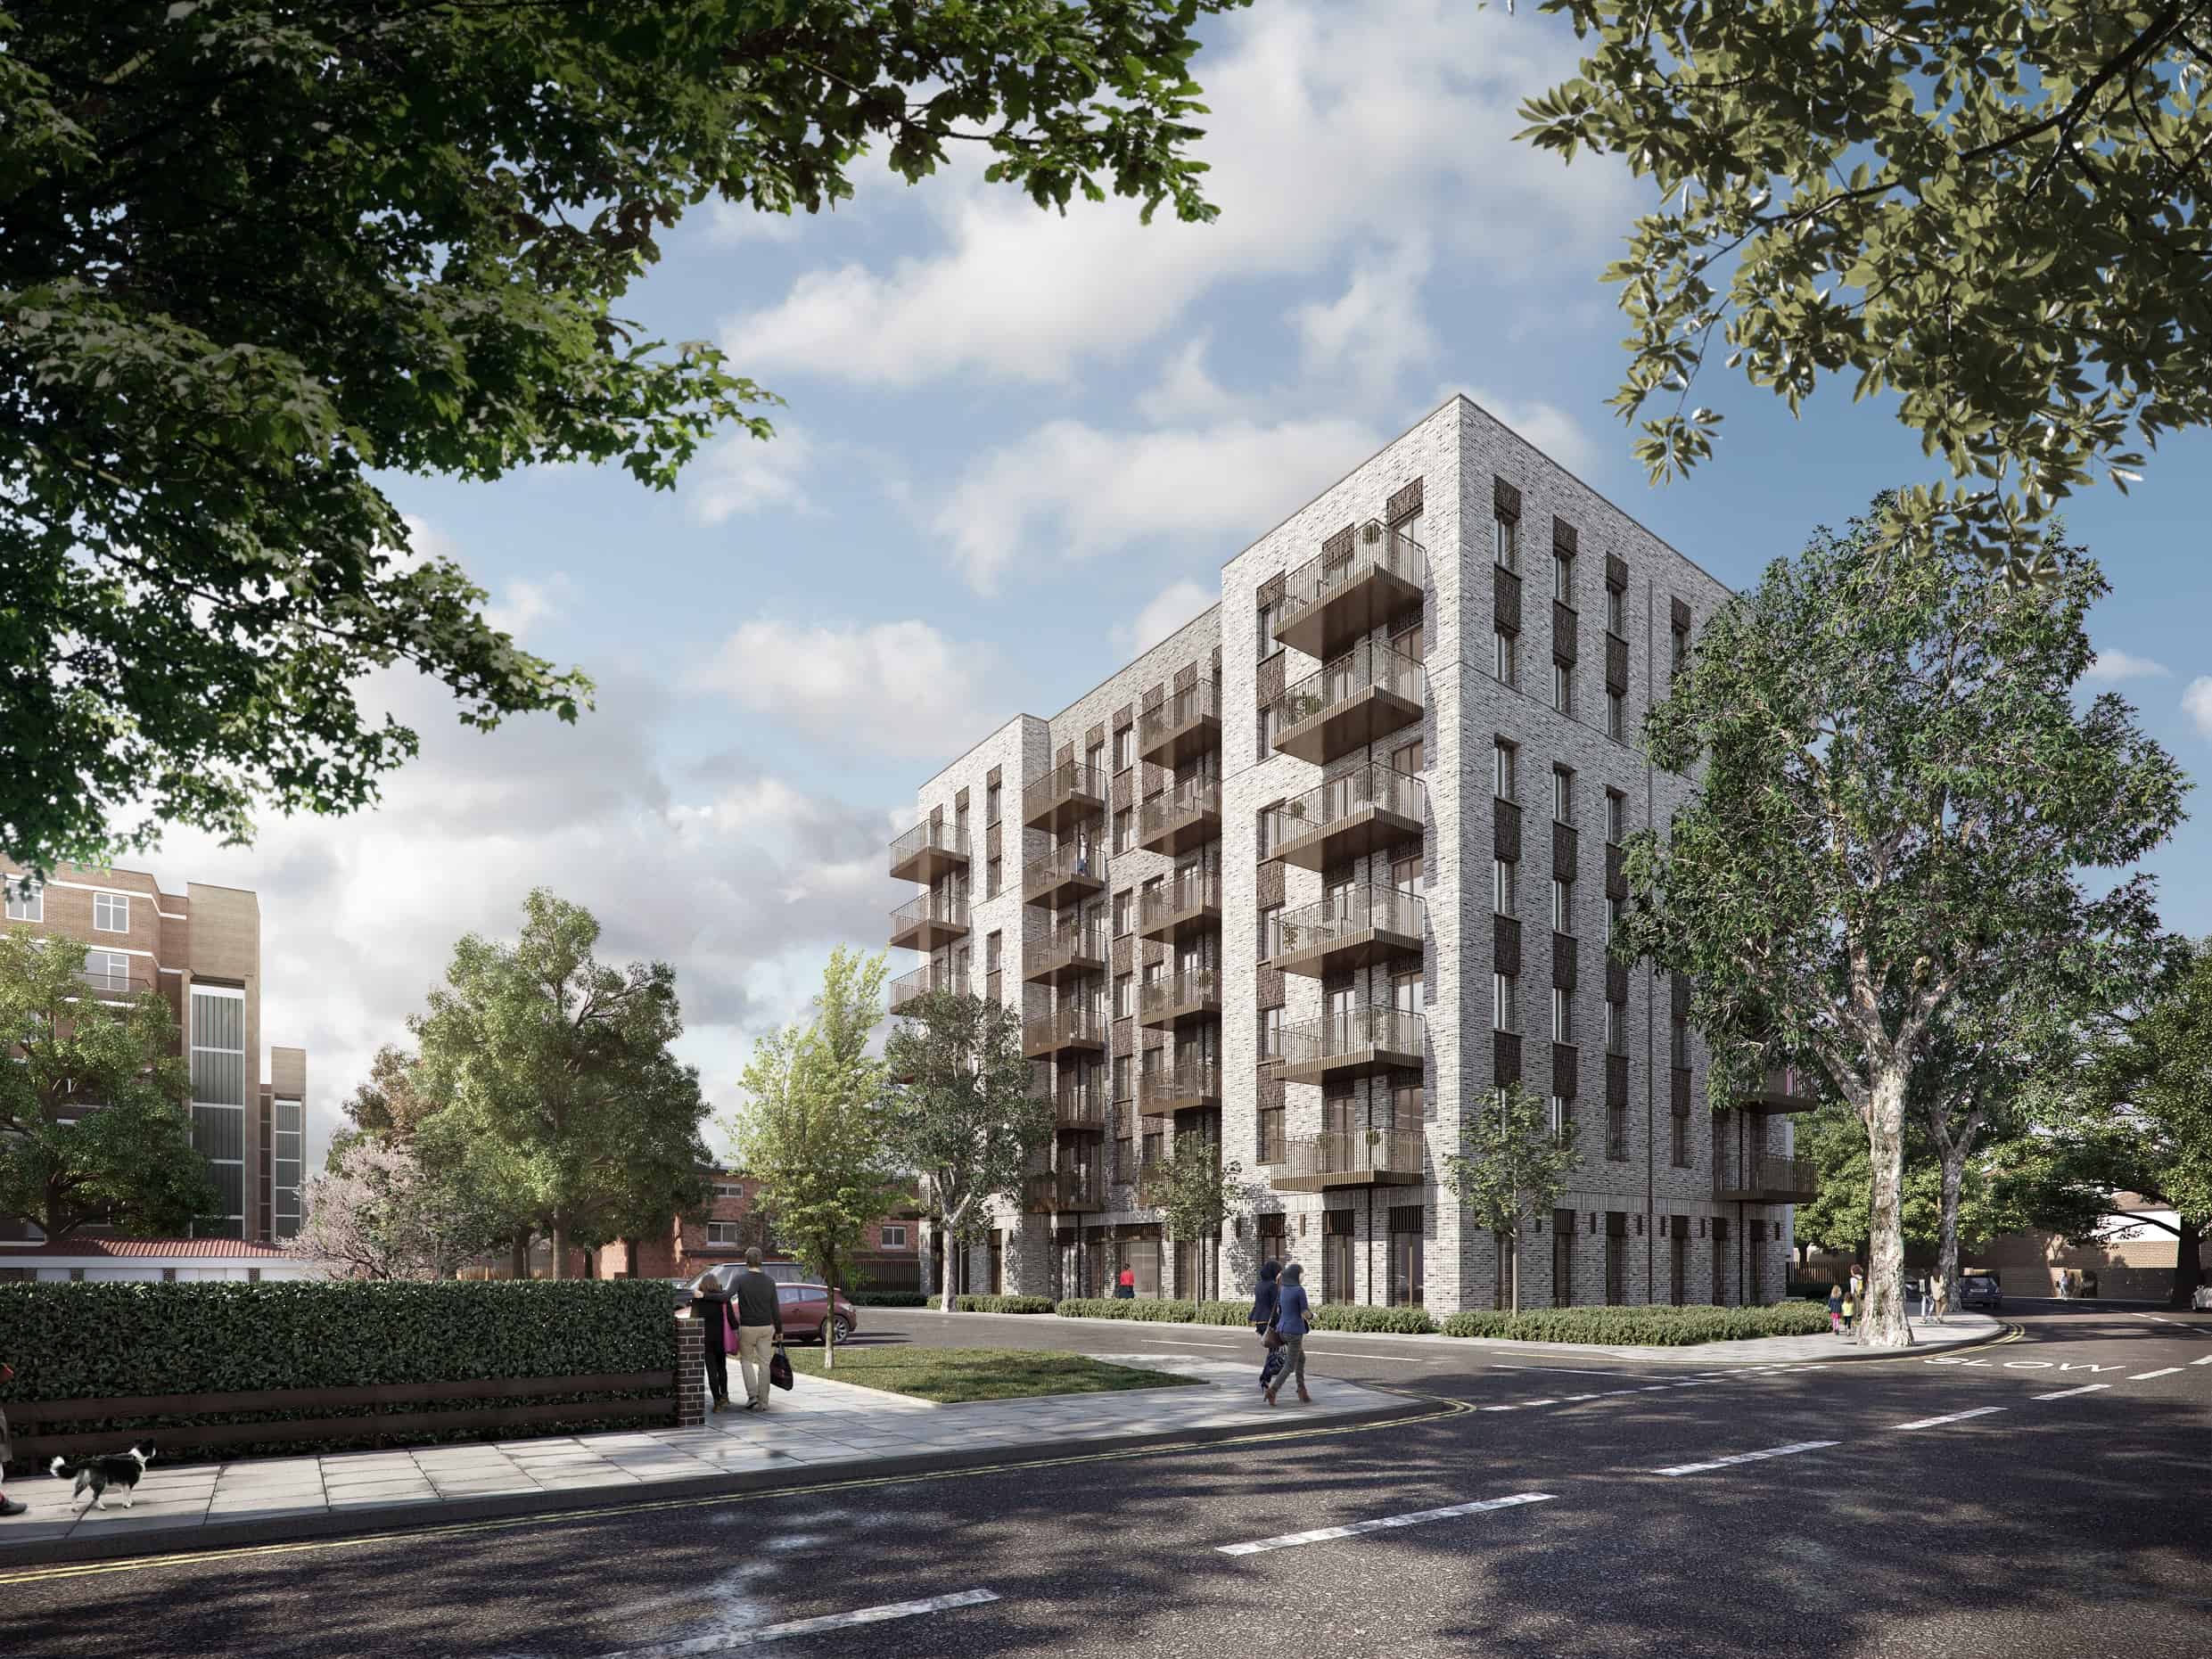 Developer impression of what the flats will look like, which has been approved by the Council